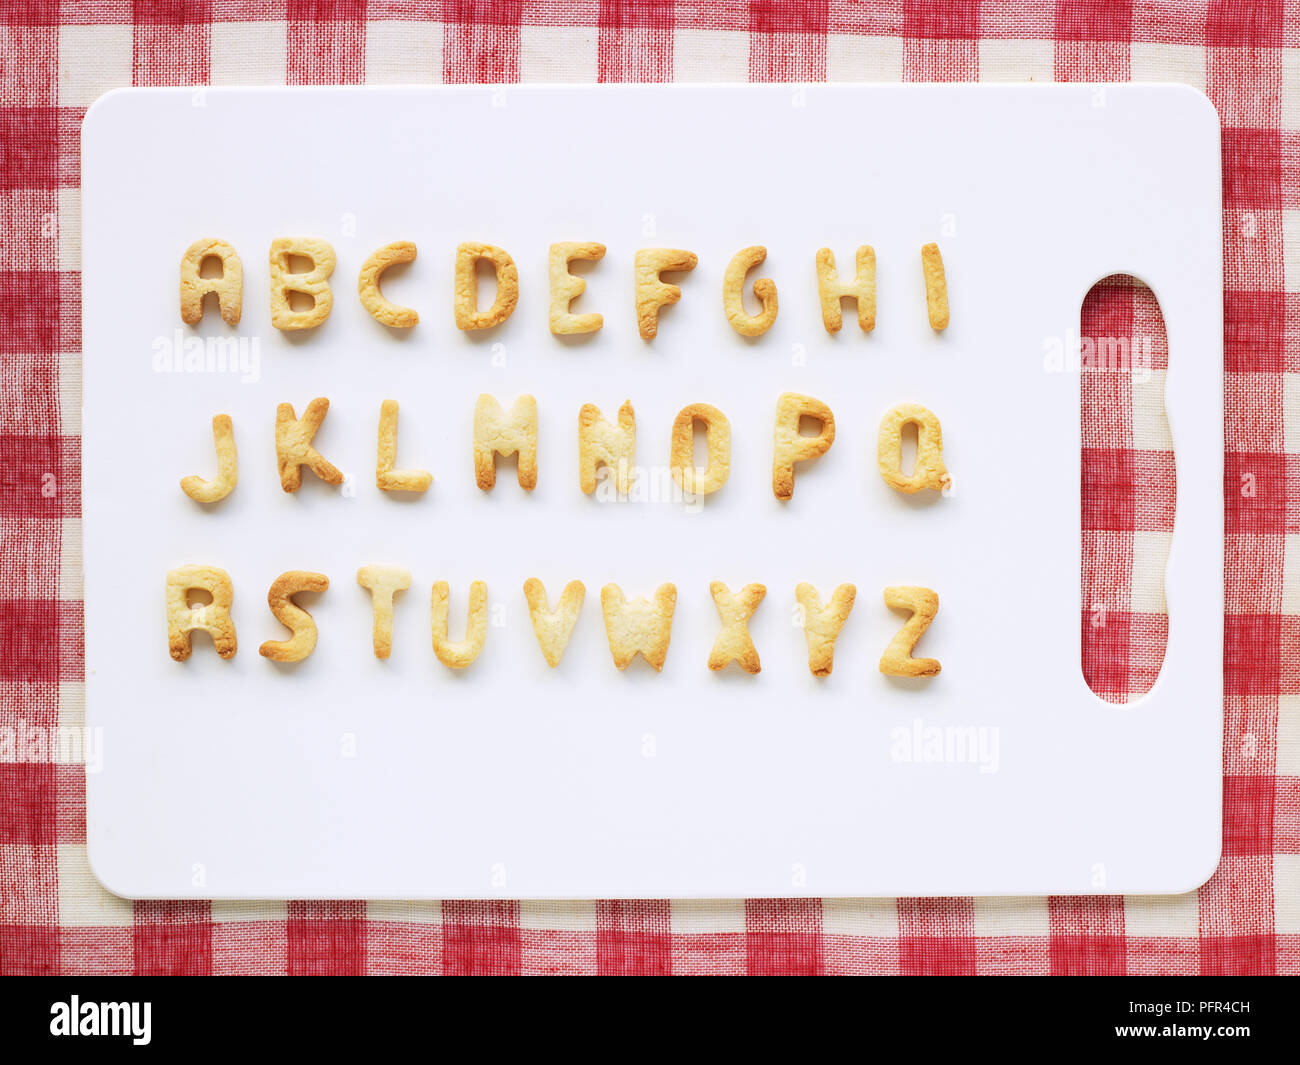 Letter shaped biscuits or alphabet biscuits Stock Photo